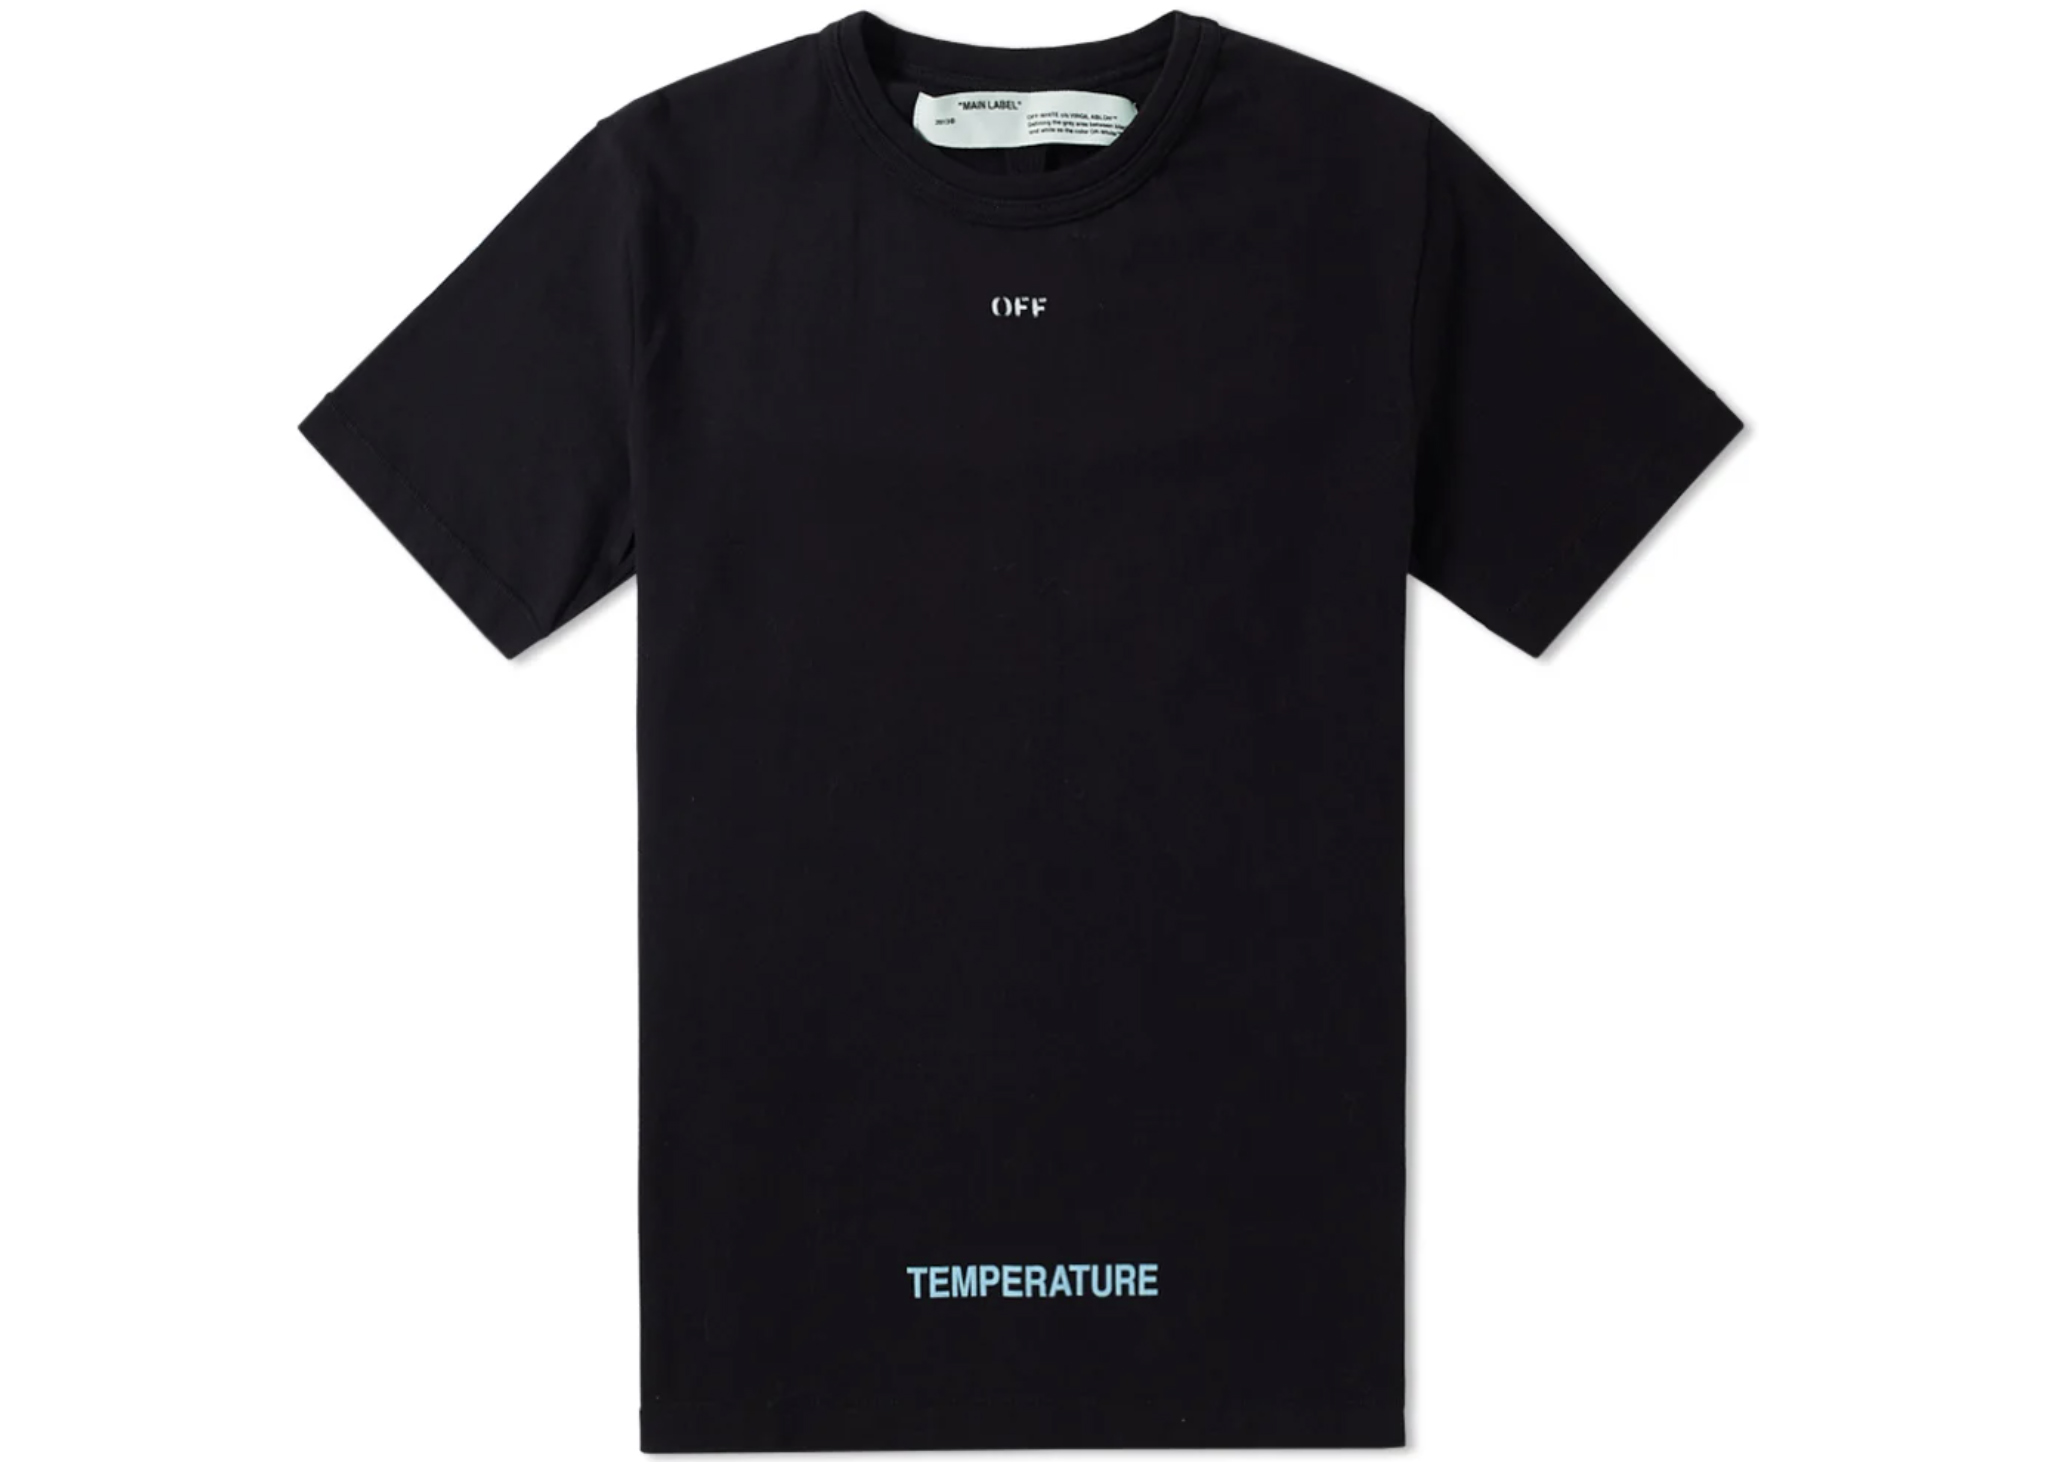 OffOFF-WHITE ”TEMPERATURE″ Tシャツ - Tシャツ/カットソー(七分/長袖)